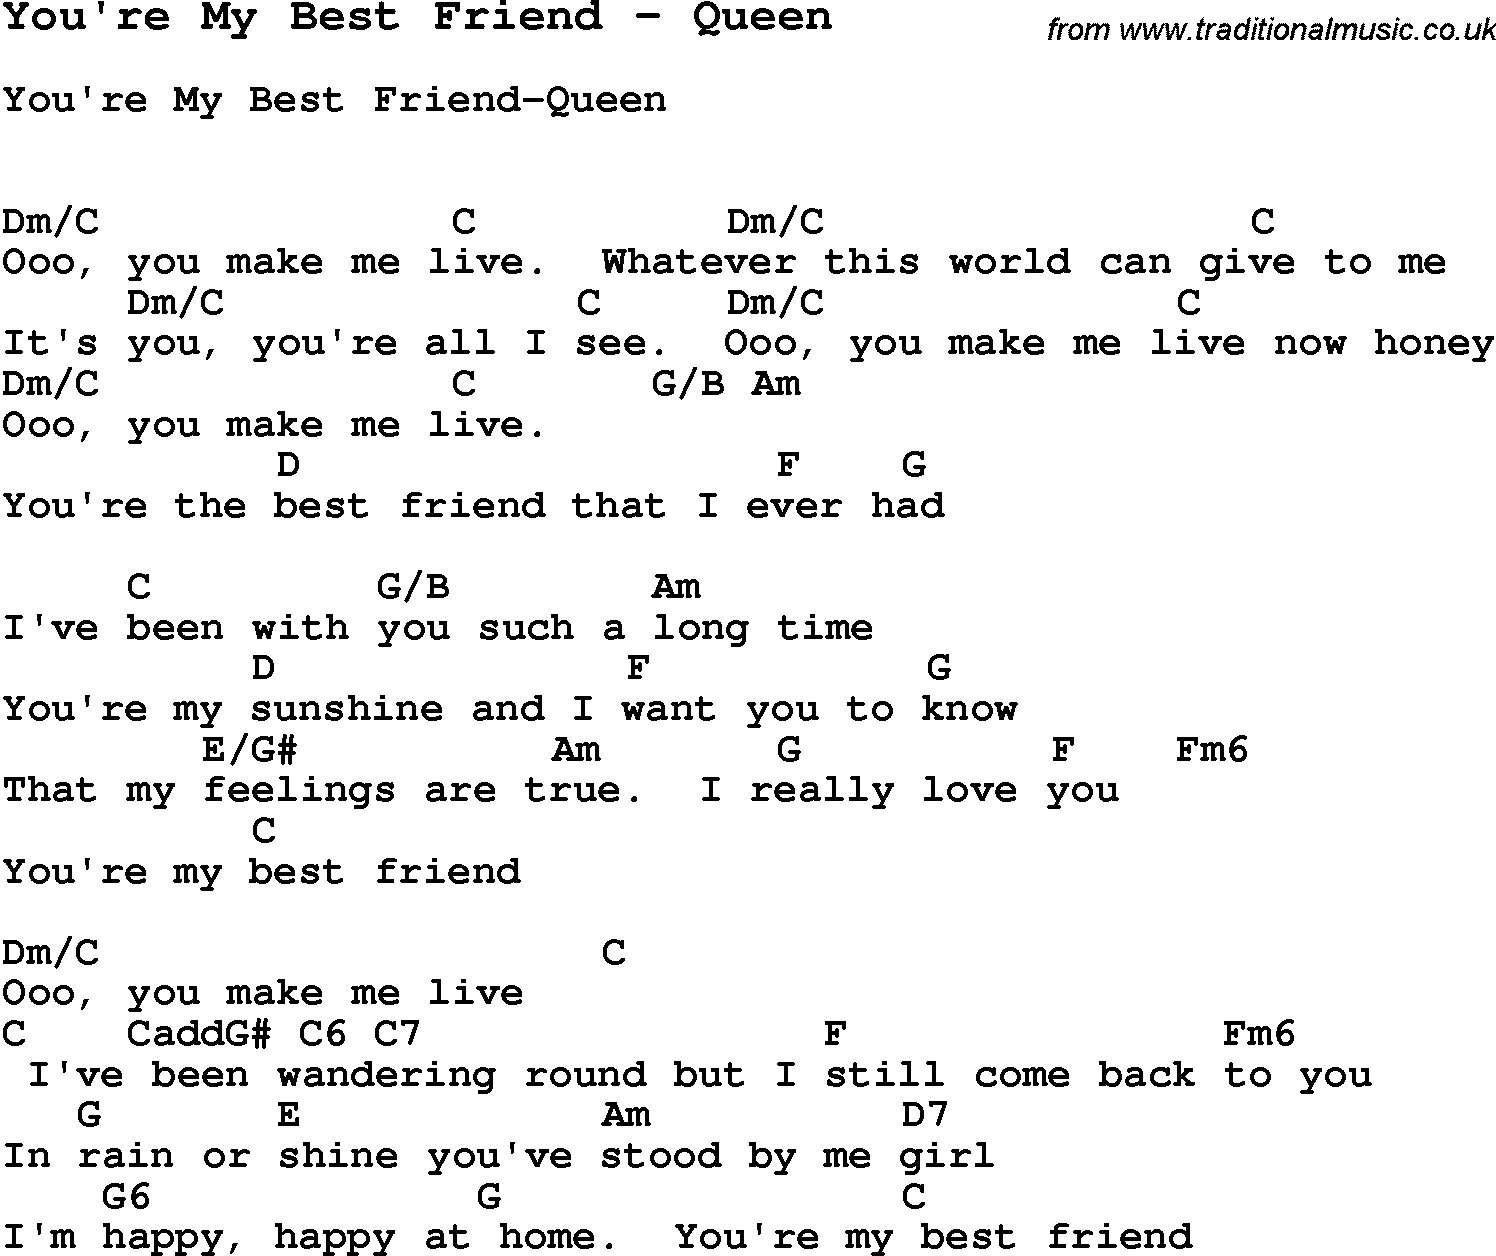 Song You're My Best Friend by Queen, with lyrics for vocal performance and accompaniment chords for Ukulele, Guitar Banjo etc.